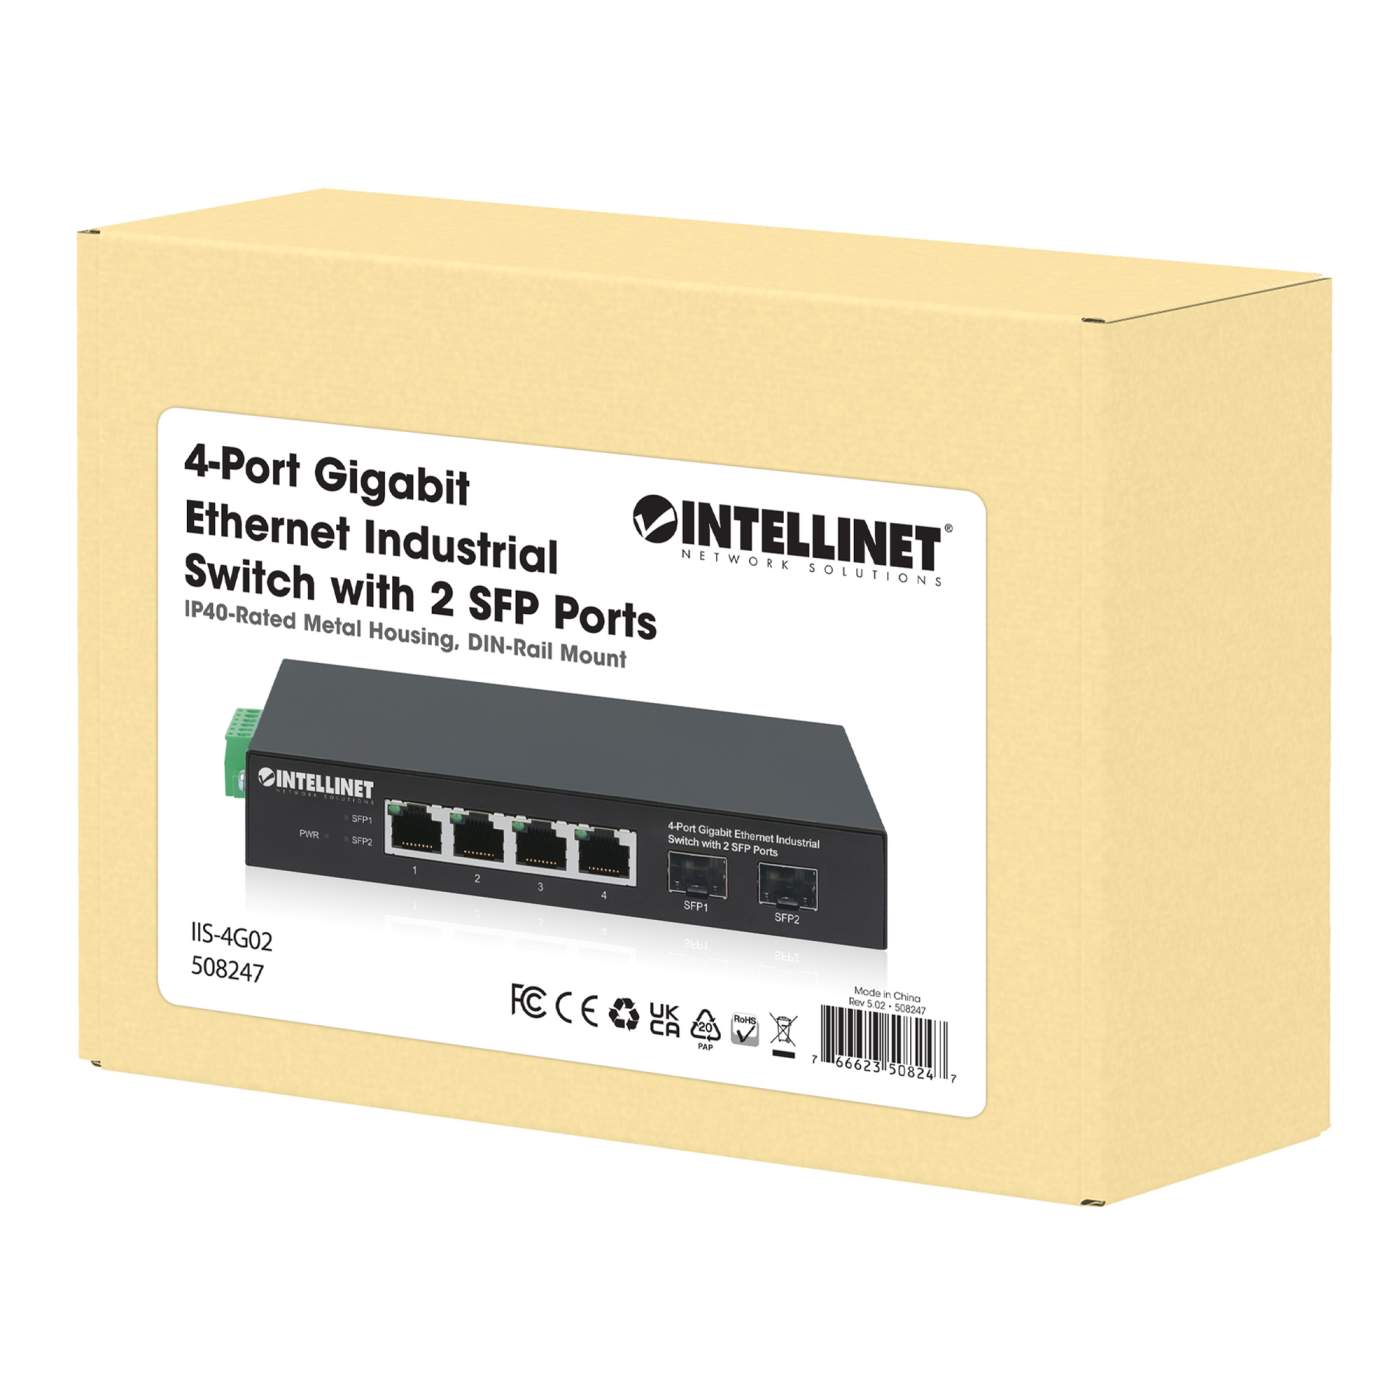 Industrial 4-Port Gigabit Ethernet Switch with 2 SFP Ports Packaging Image 2